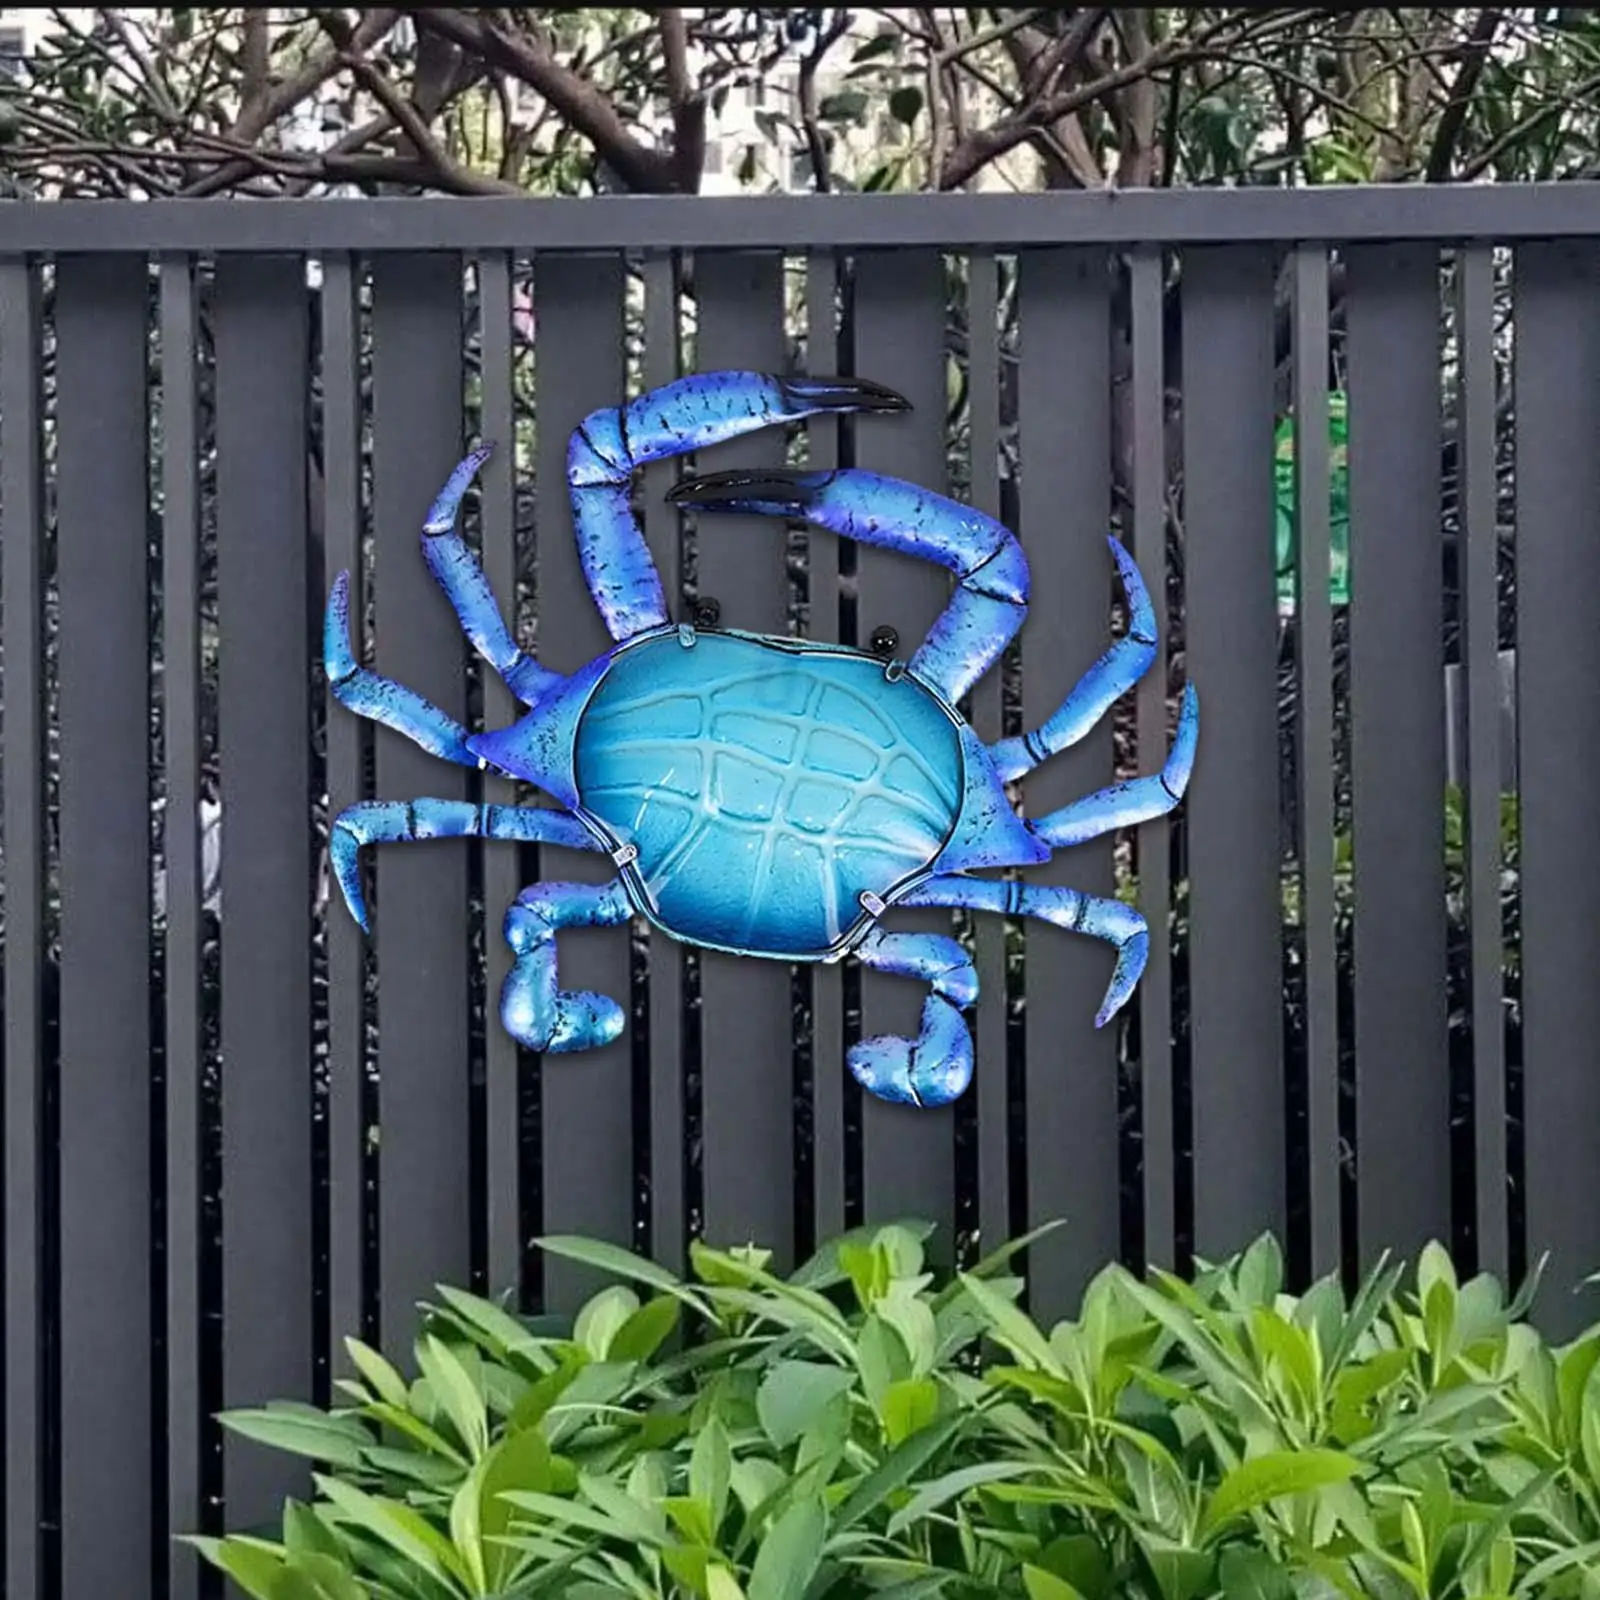 Crab Wall Sculpture Collectible Figurine Statue Ornament Metal Wall Art Hanging for Home Living Room Decor